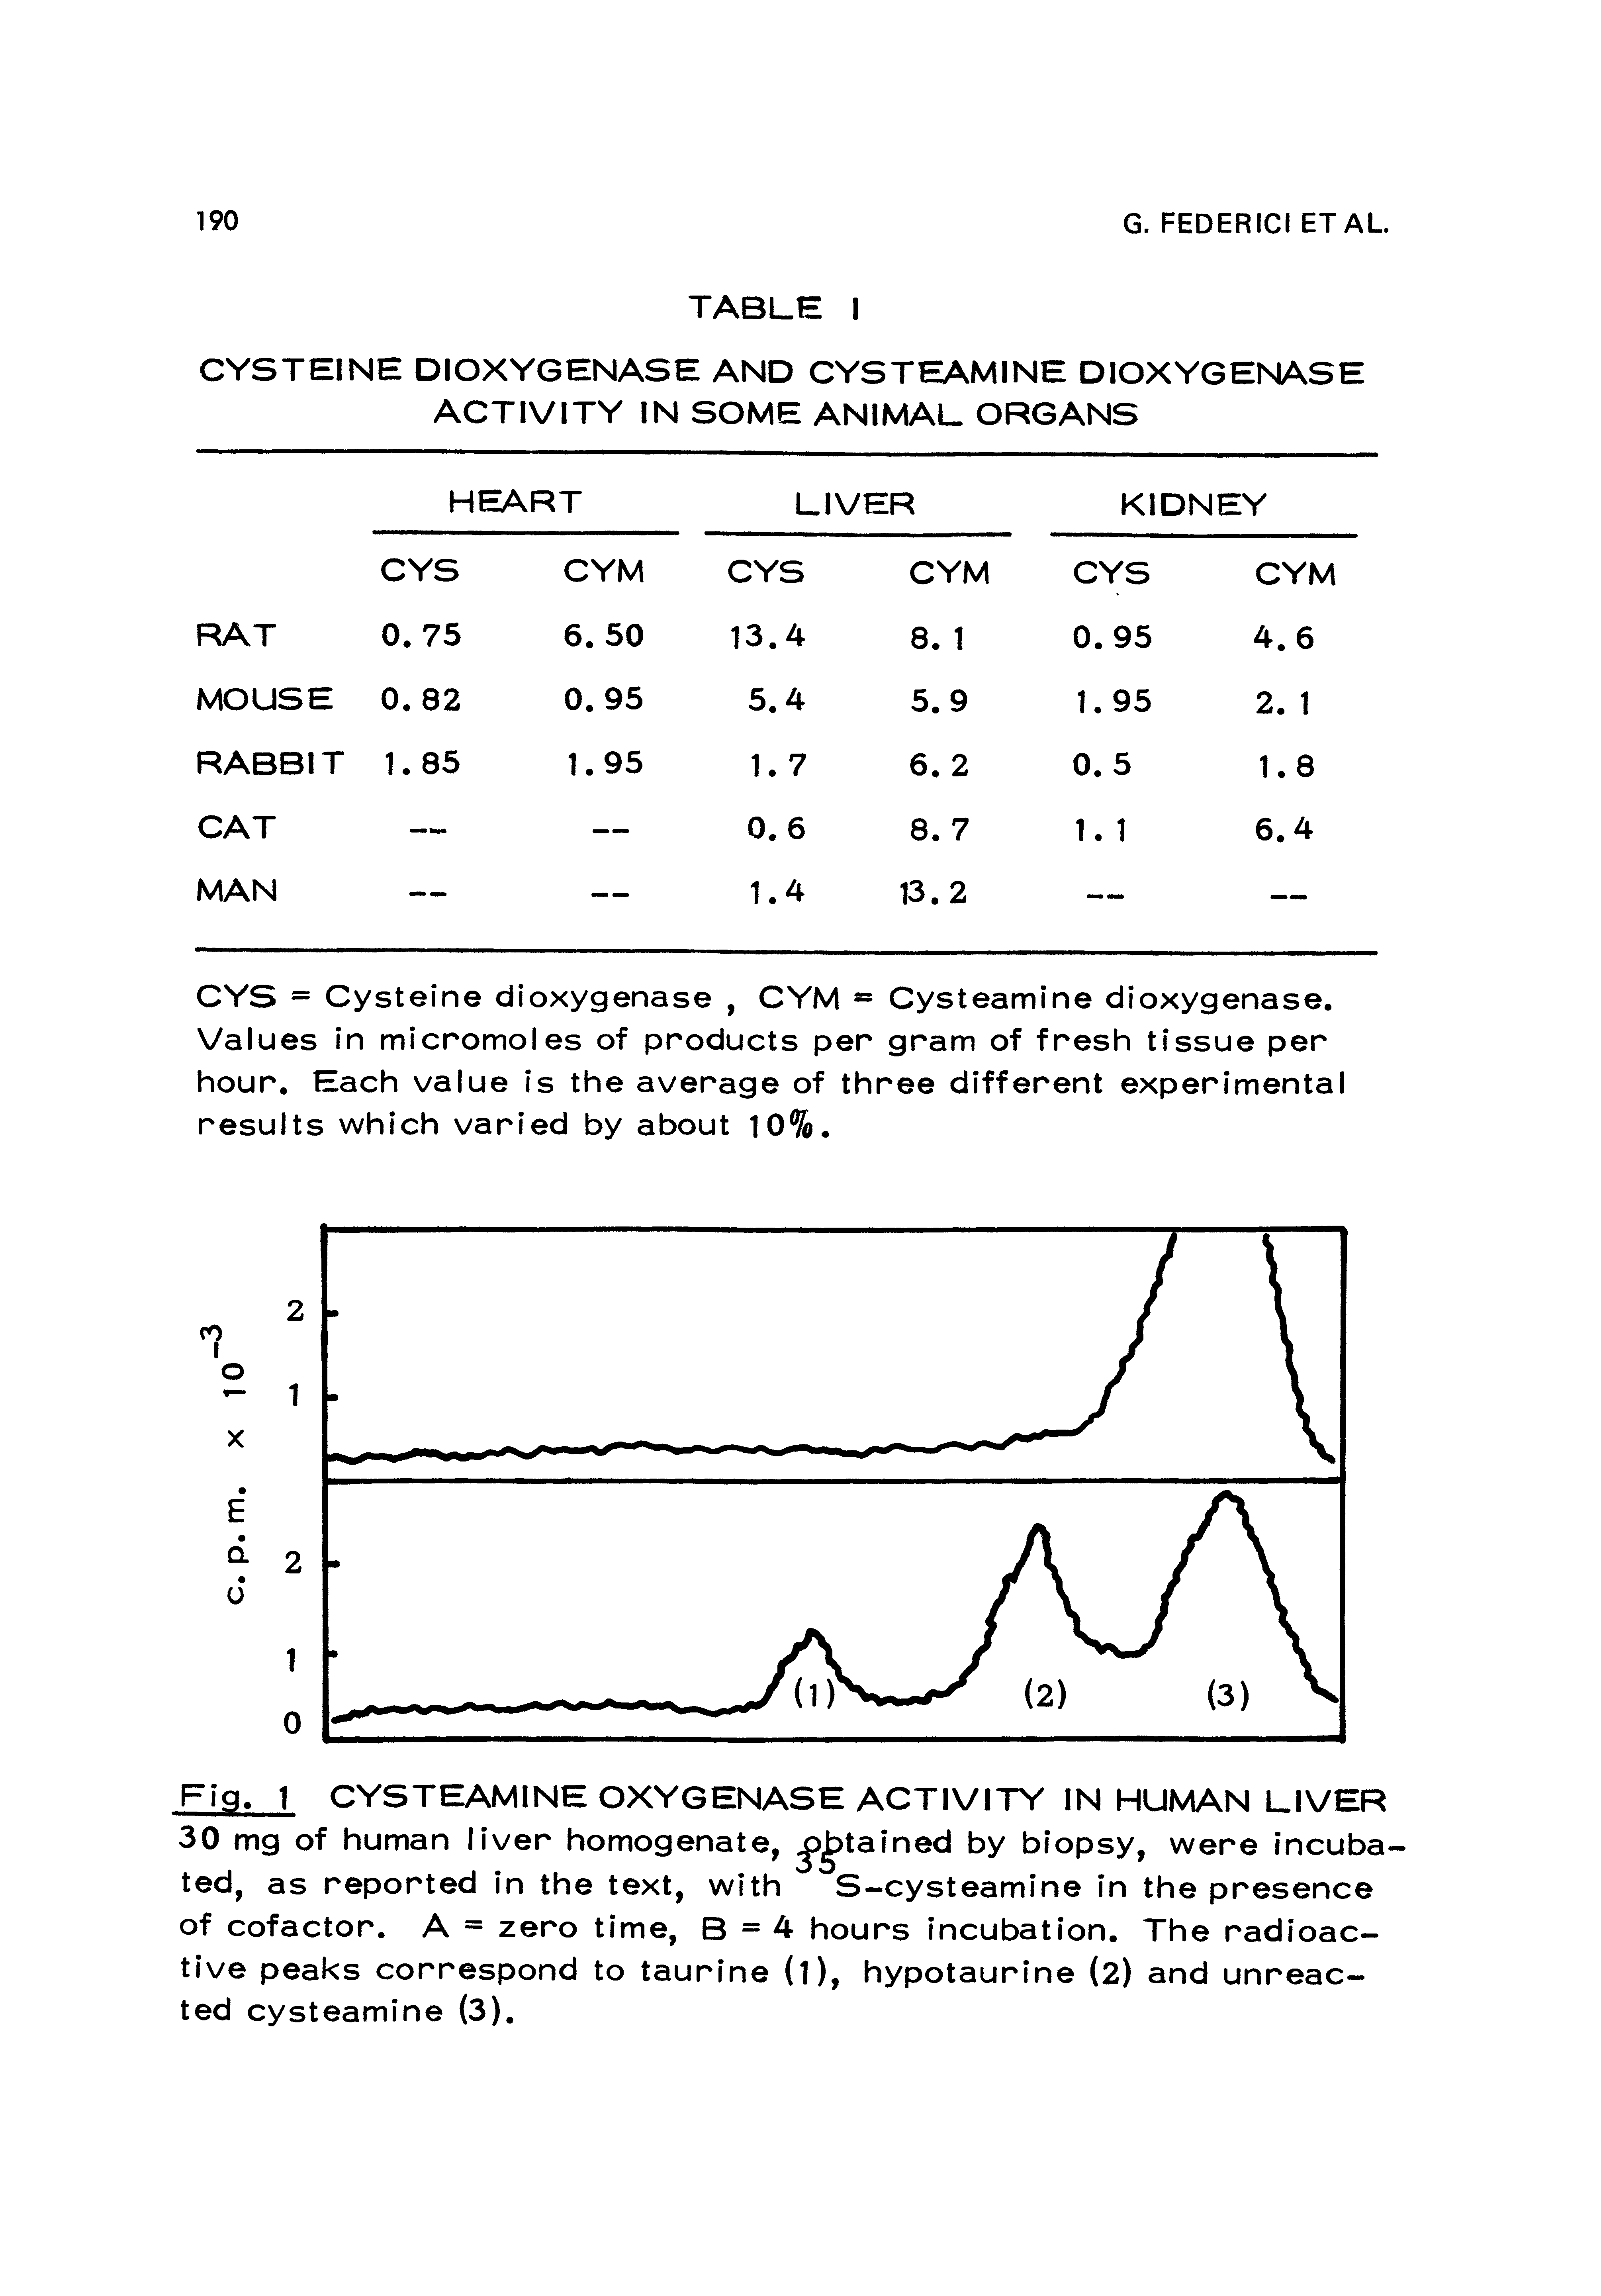 Fig. 1 CYSTEAMINE OXYGENASE ACTIVITY IN HUMAN LIVER 30 mg of human liver homogenate, j> tained by biopsy, were incubated, as reported in the text, with S-cysteamine in the presence of cofactor. A = zero time, B = 4 hours incubation. The radioactive peaks correspond to taurine (l), hypotaurine (2) and unreacted cysteamine (3).